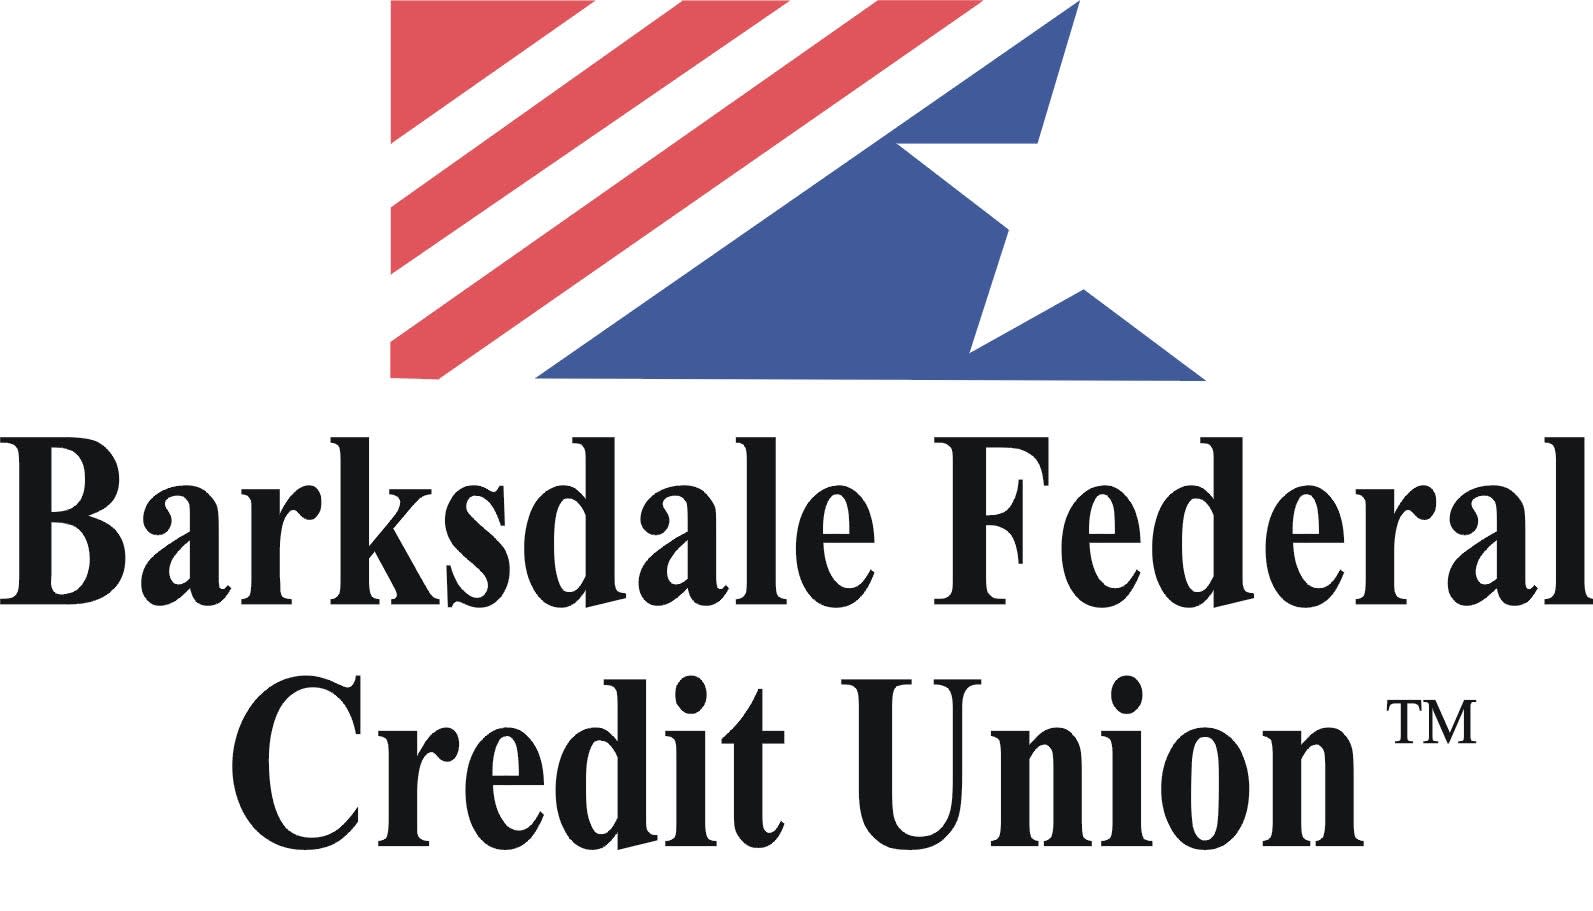 Barksdale Federal Credit Union-Pines Road Center